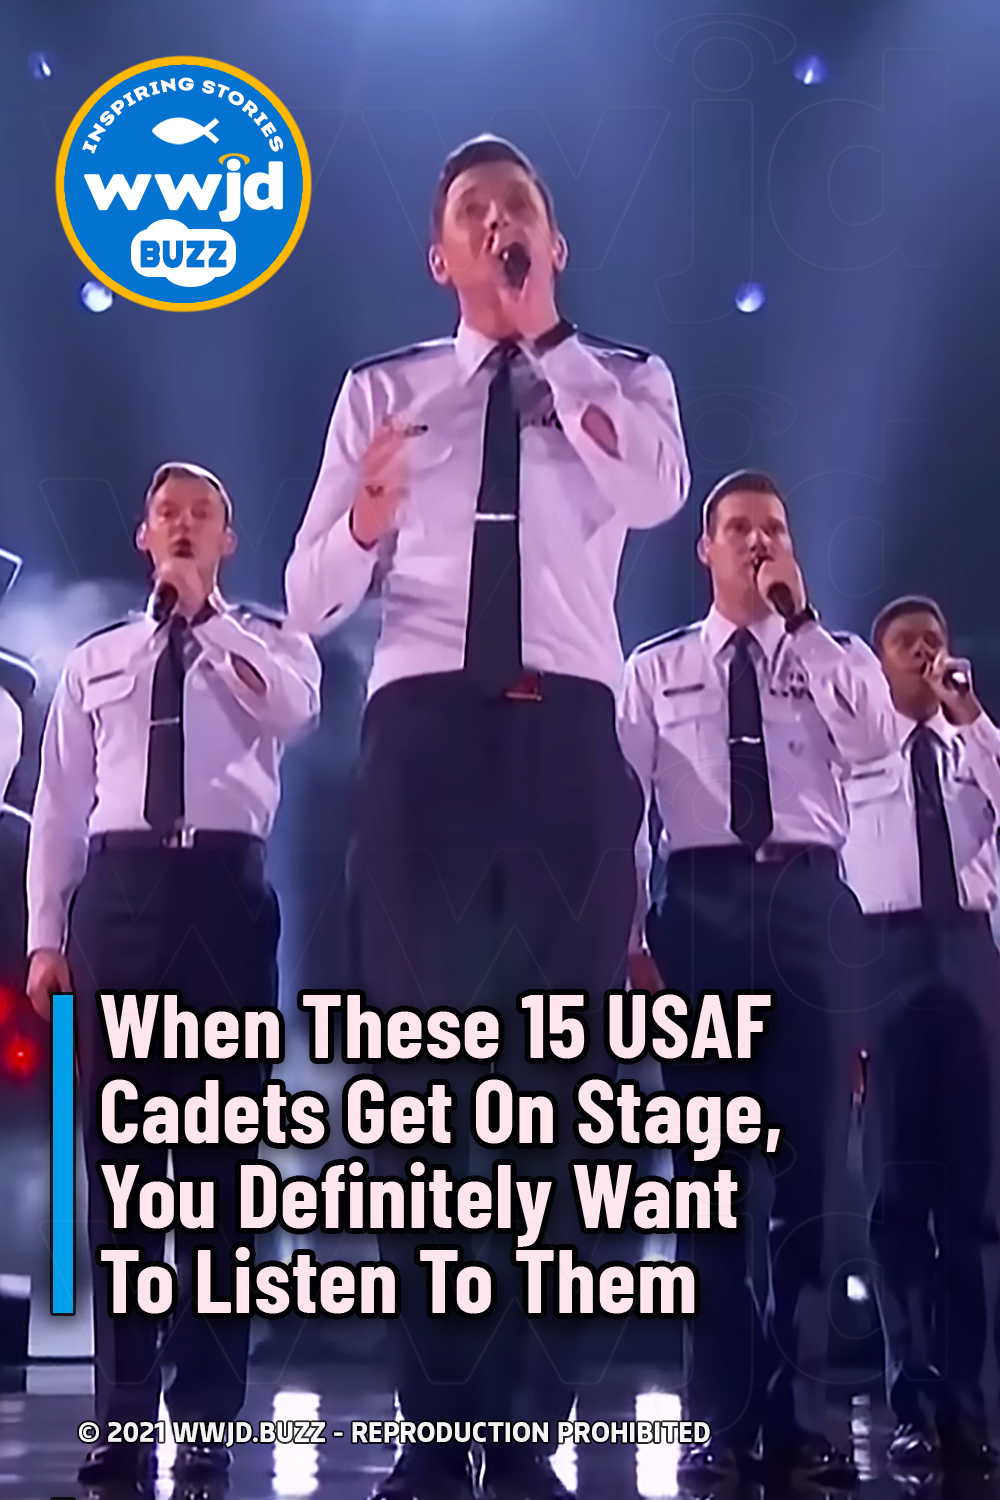 When These 15 USAF Cadets Get On Stage, You Definitely Want To Listen To Them